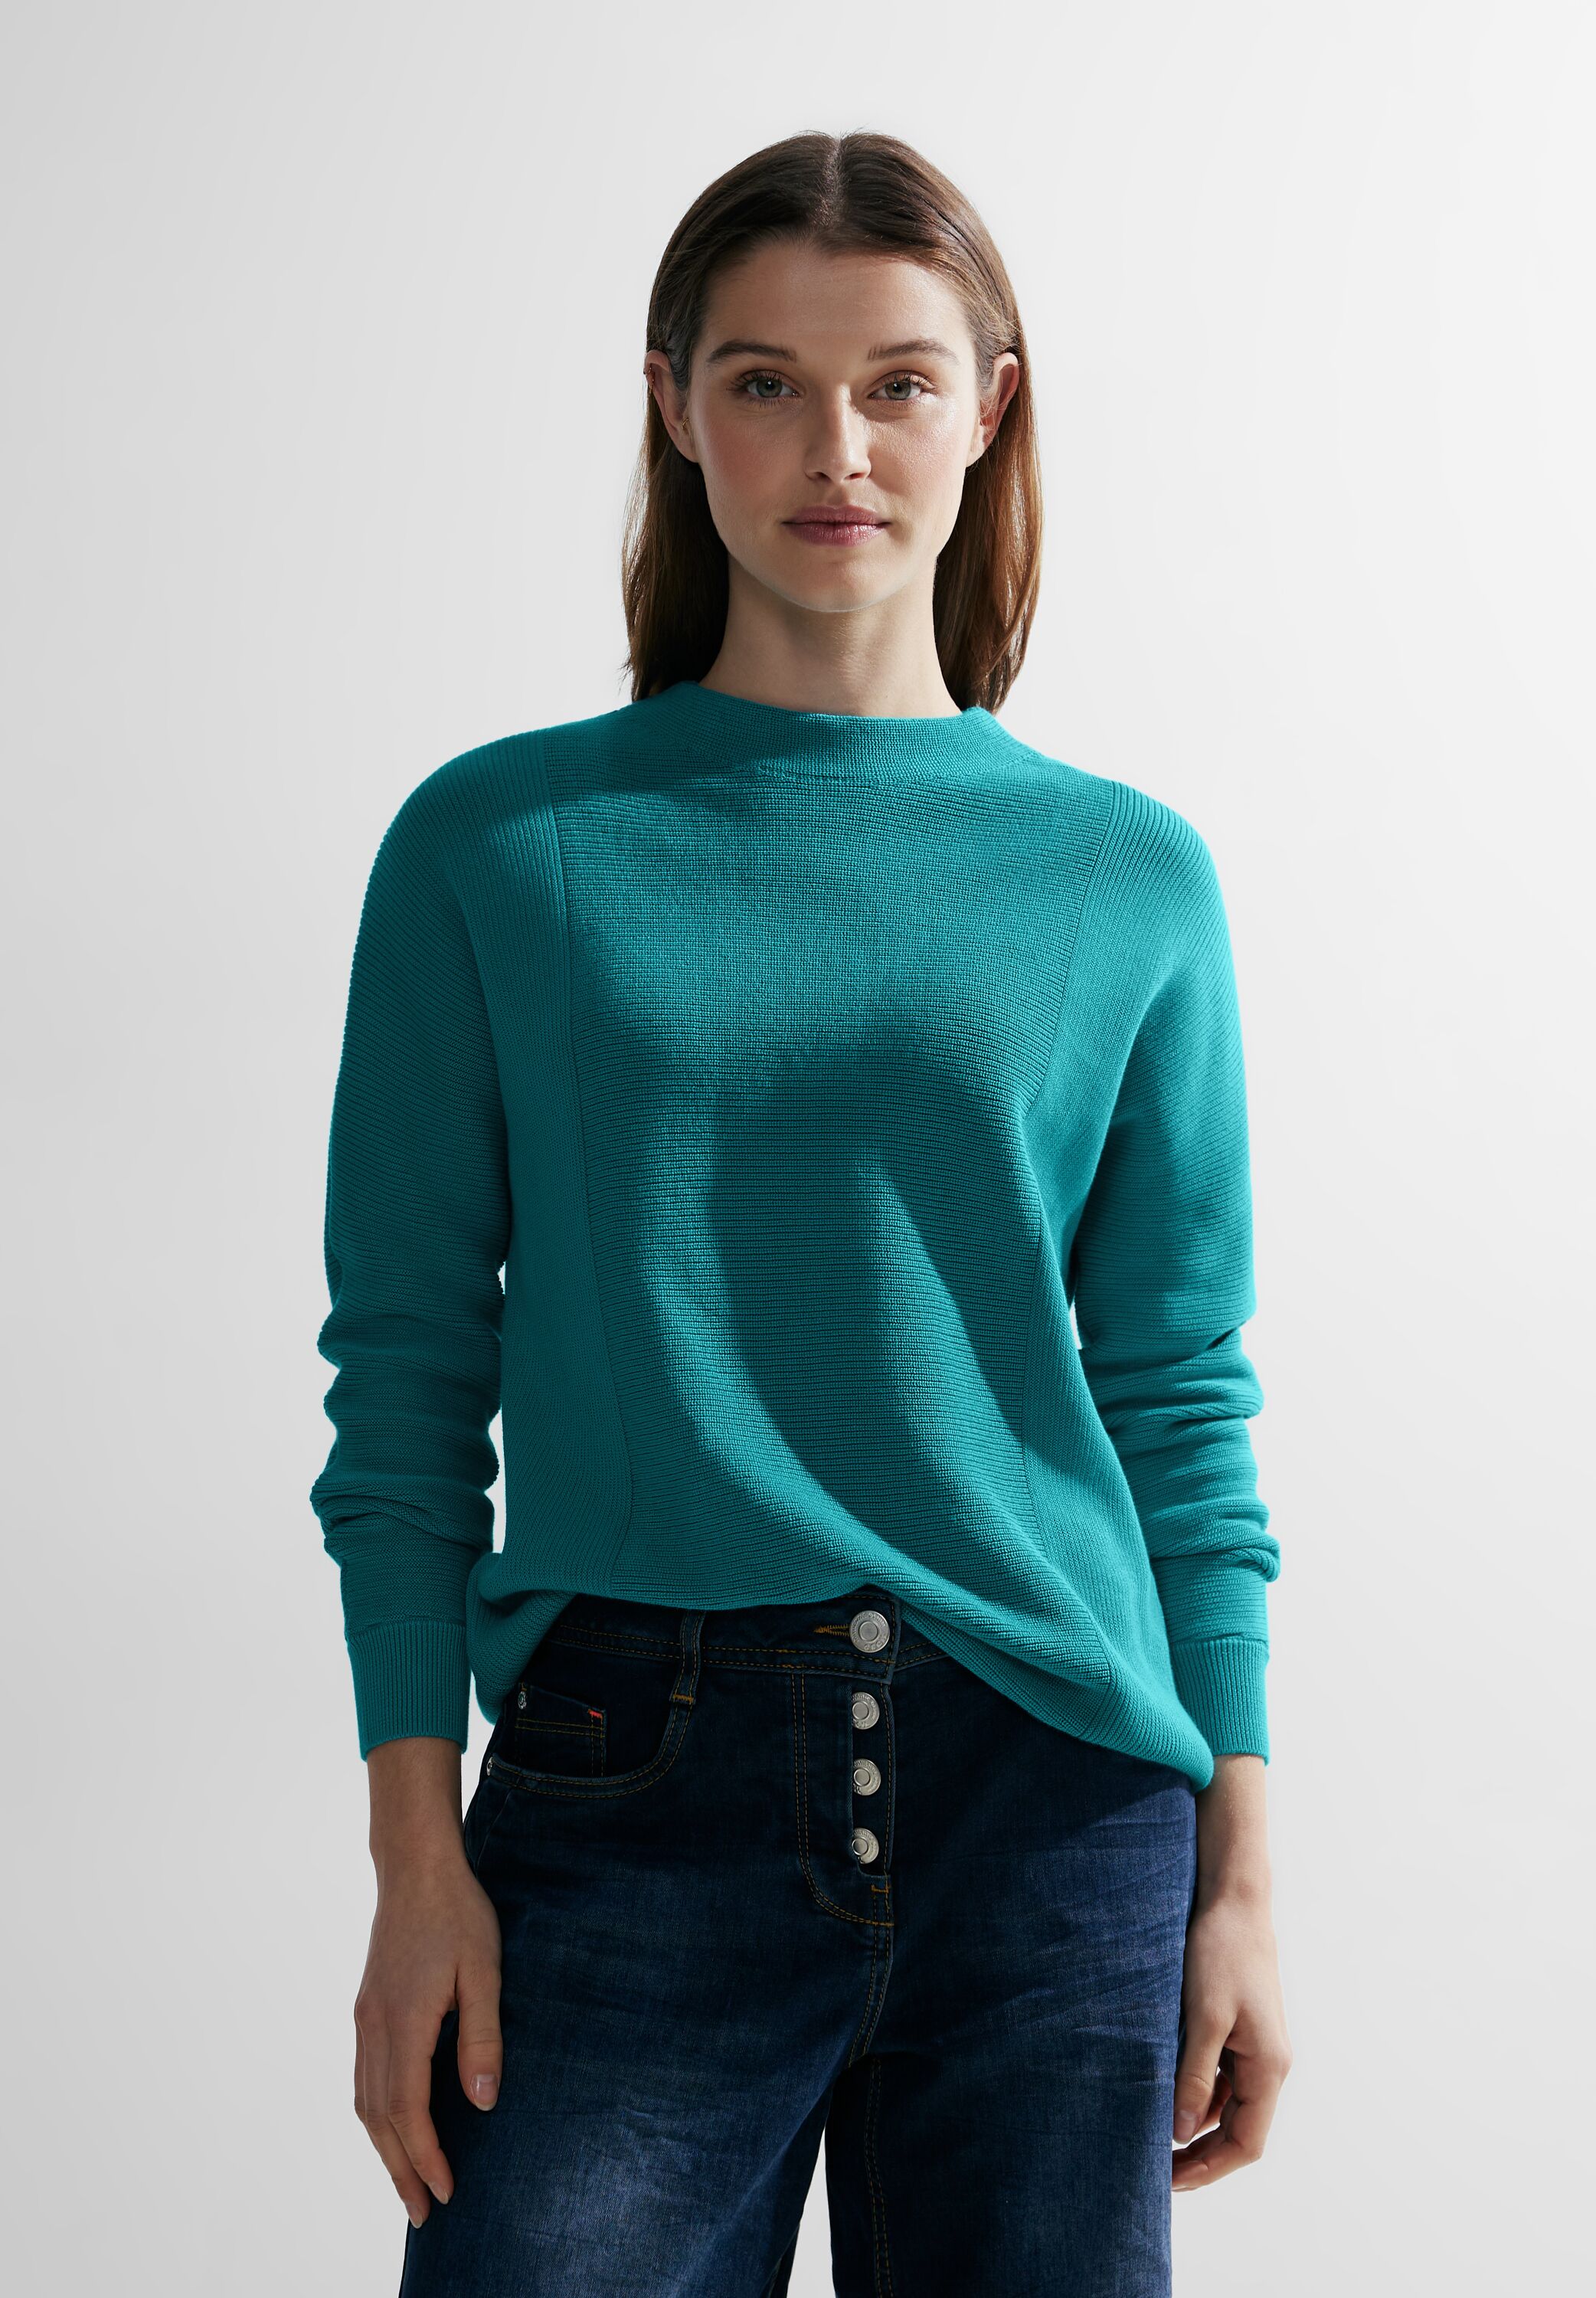 Blue - Frosted B302639-15318 Stehkragenpullover CONCEPT in Aqua CECIL Mode